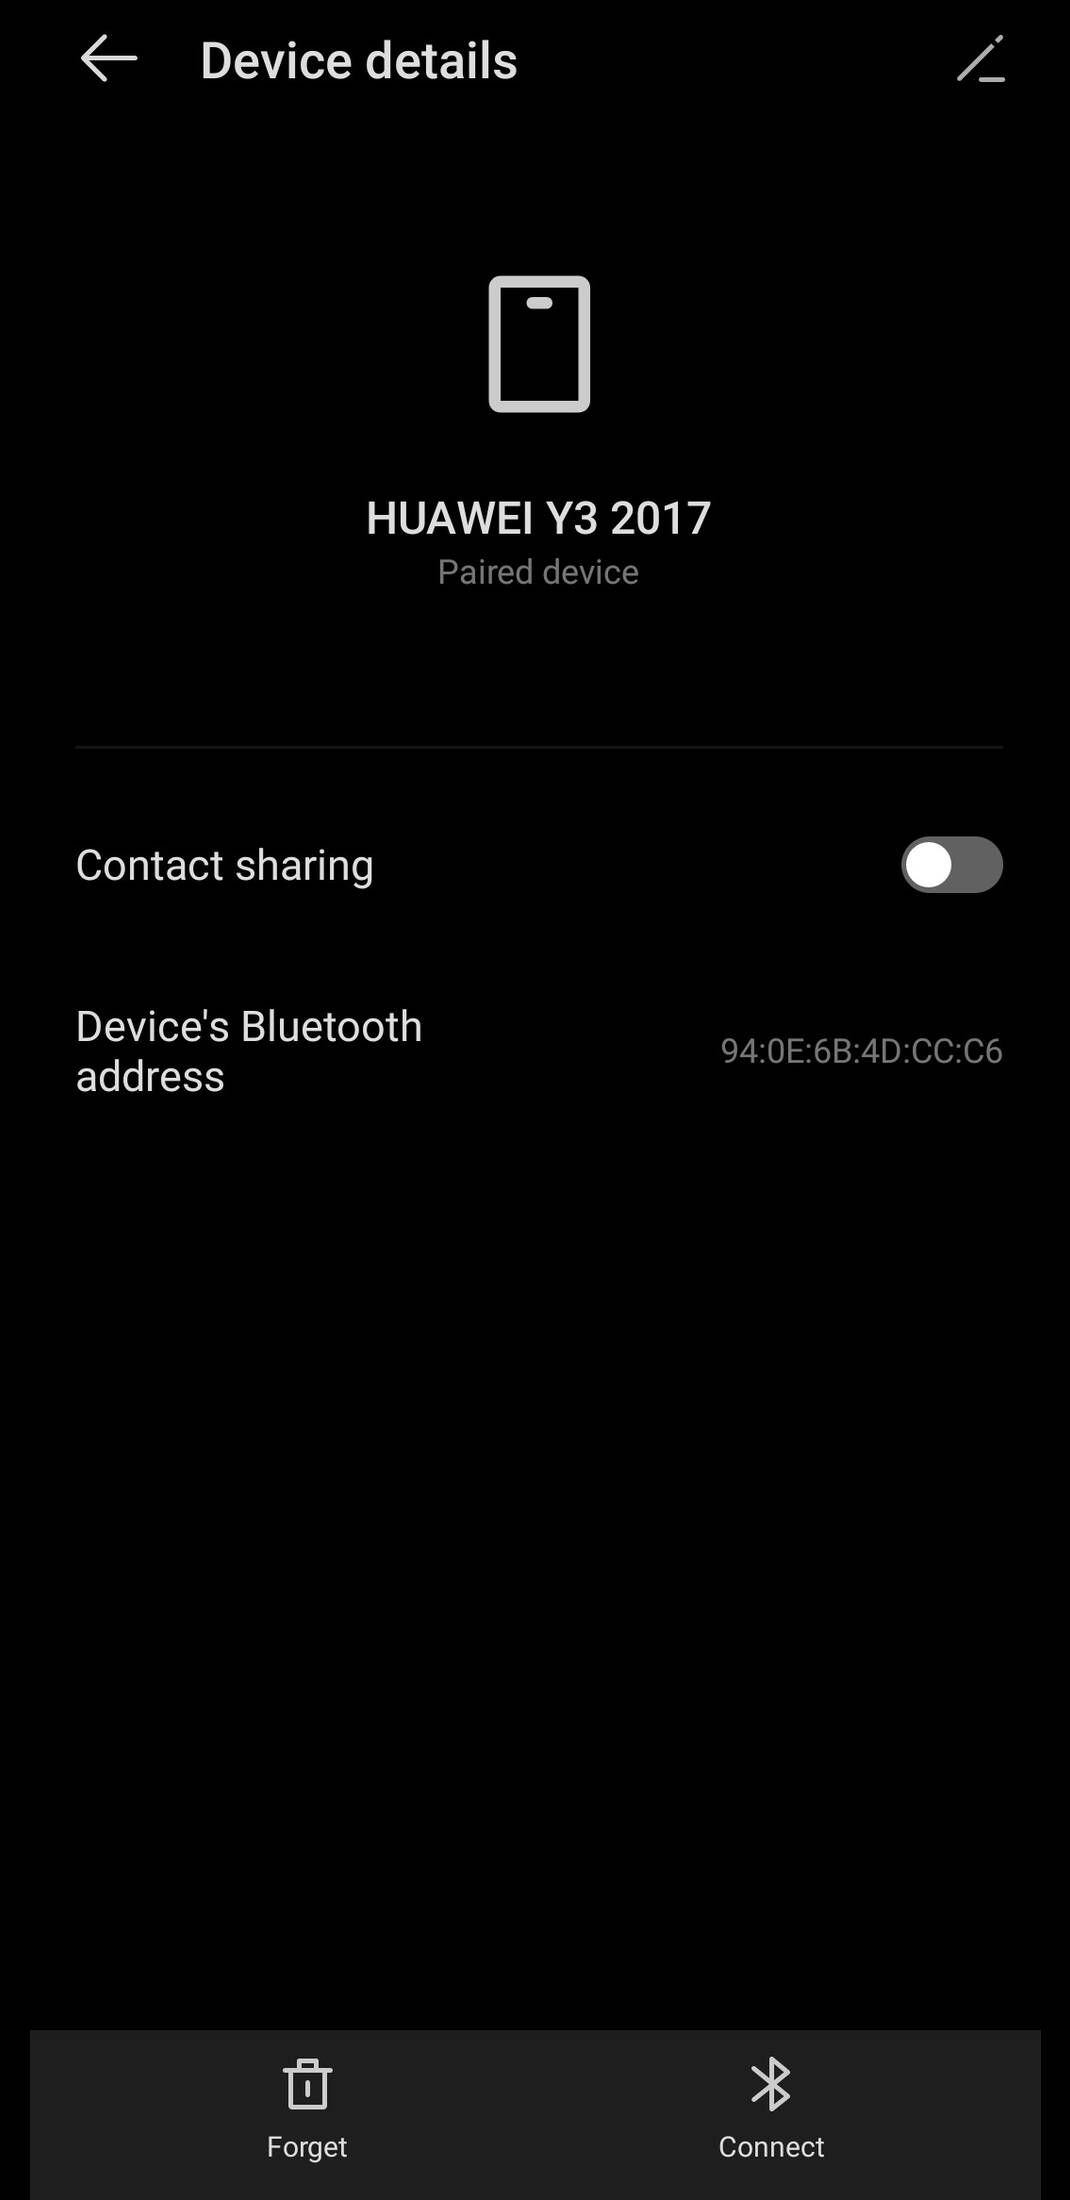 Bluetooth device details menu showing Forget and Connect options